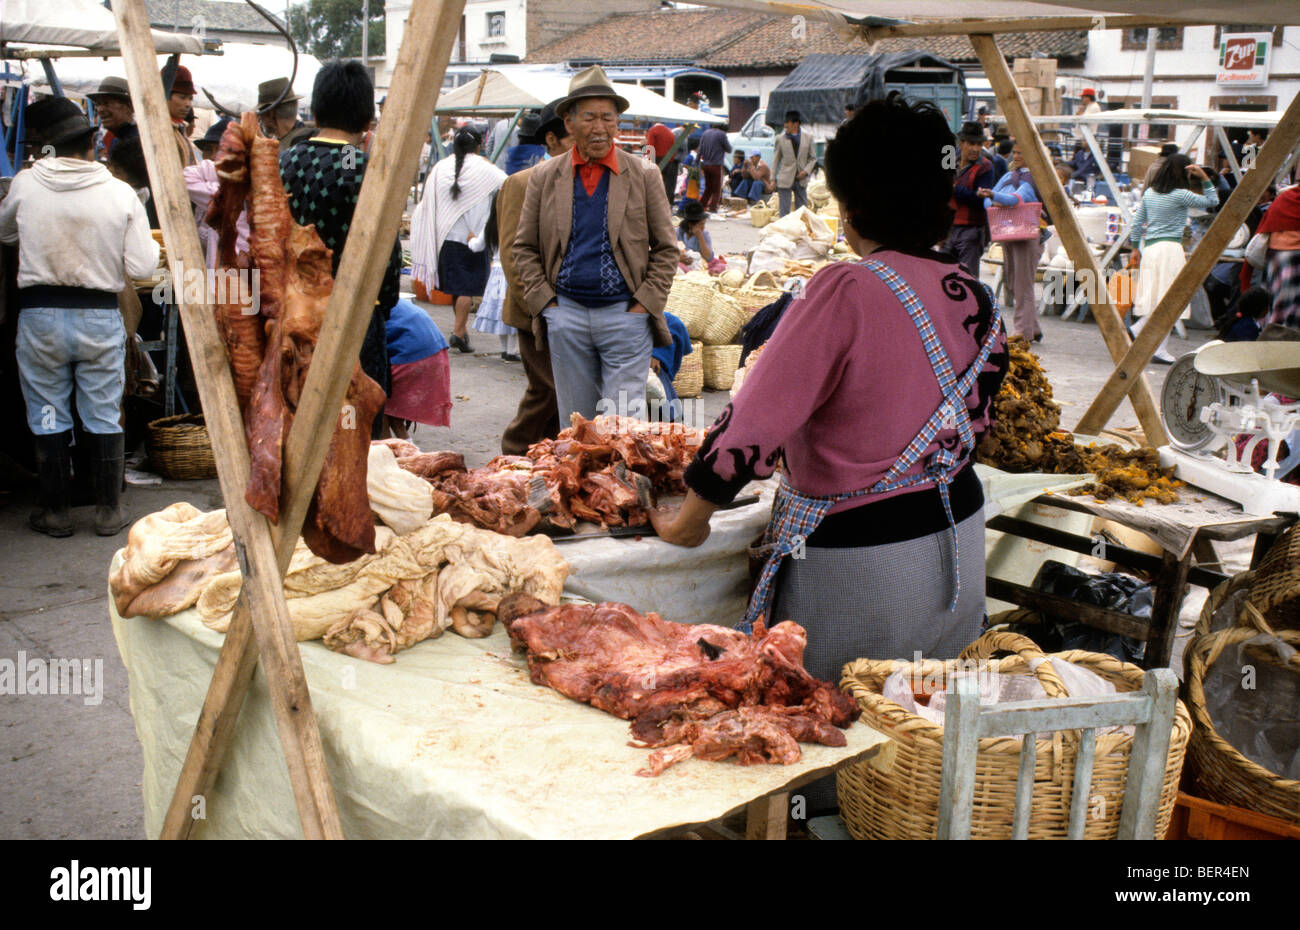 Meat seller  Piles and lumps of reddish unidentifyable meat lie on open stall.  Ecuadorian highland market Stock Photo